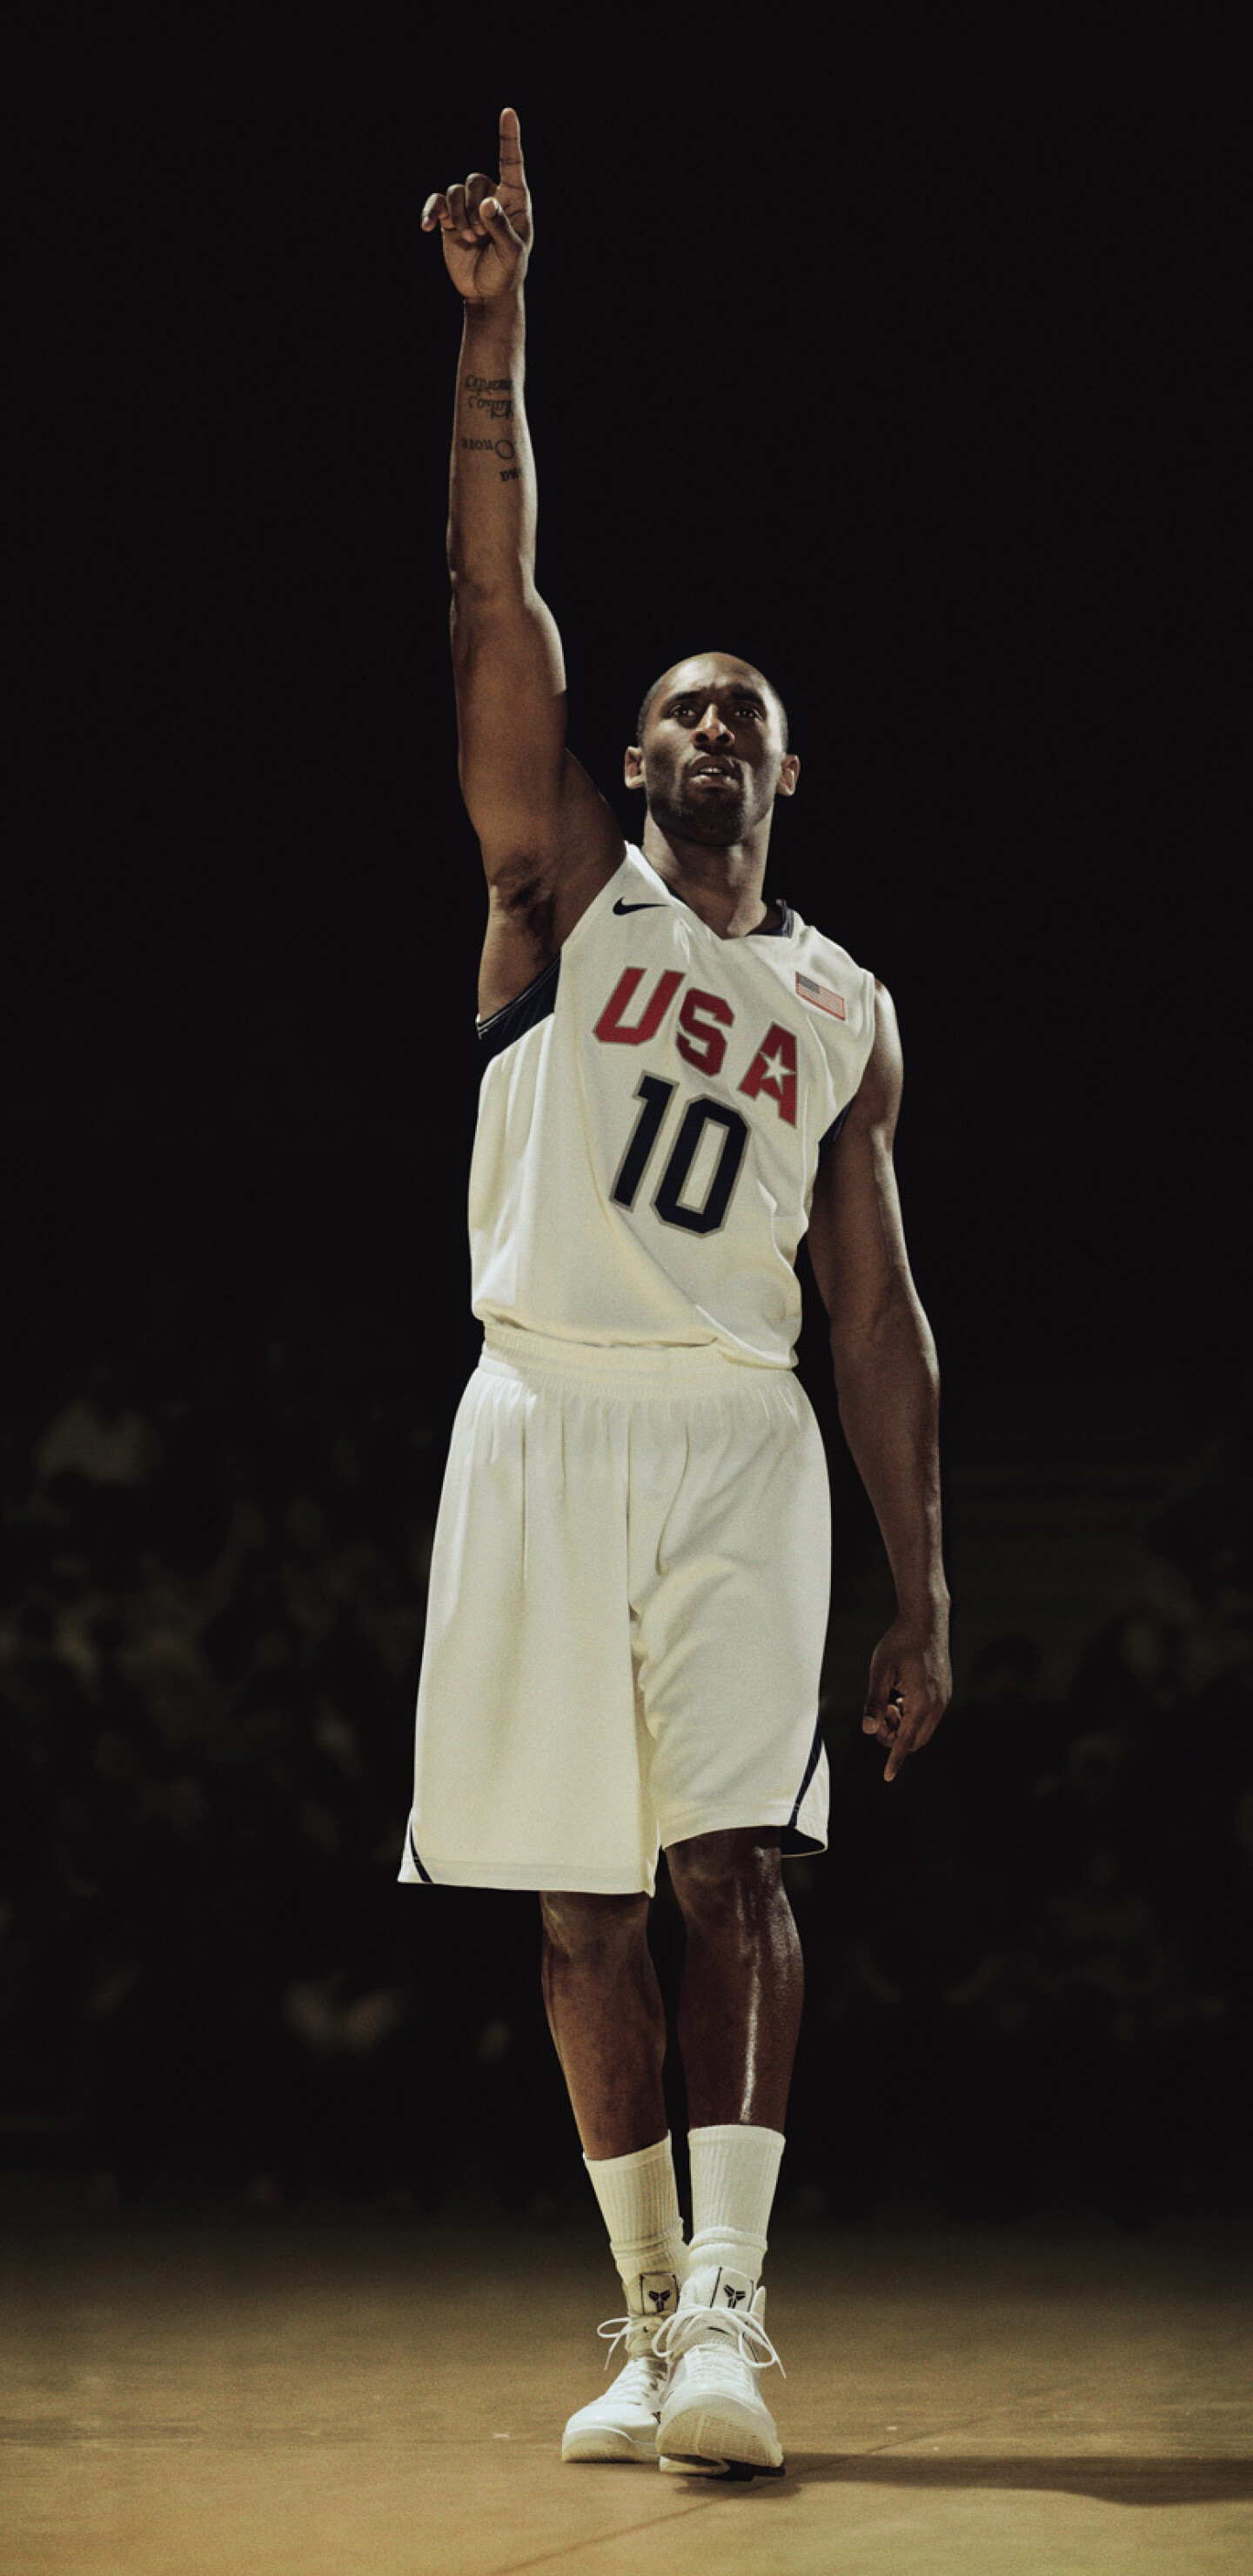 Kobe Bryant: He declared for the 1996 NBA draft and was selected by the Charlotte Hornets with the 13th overall pick. 1440x2960 HD Wallpaper.